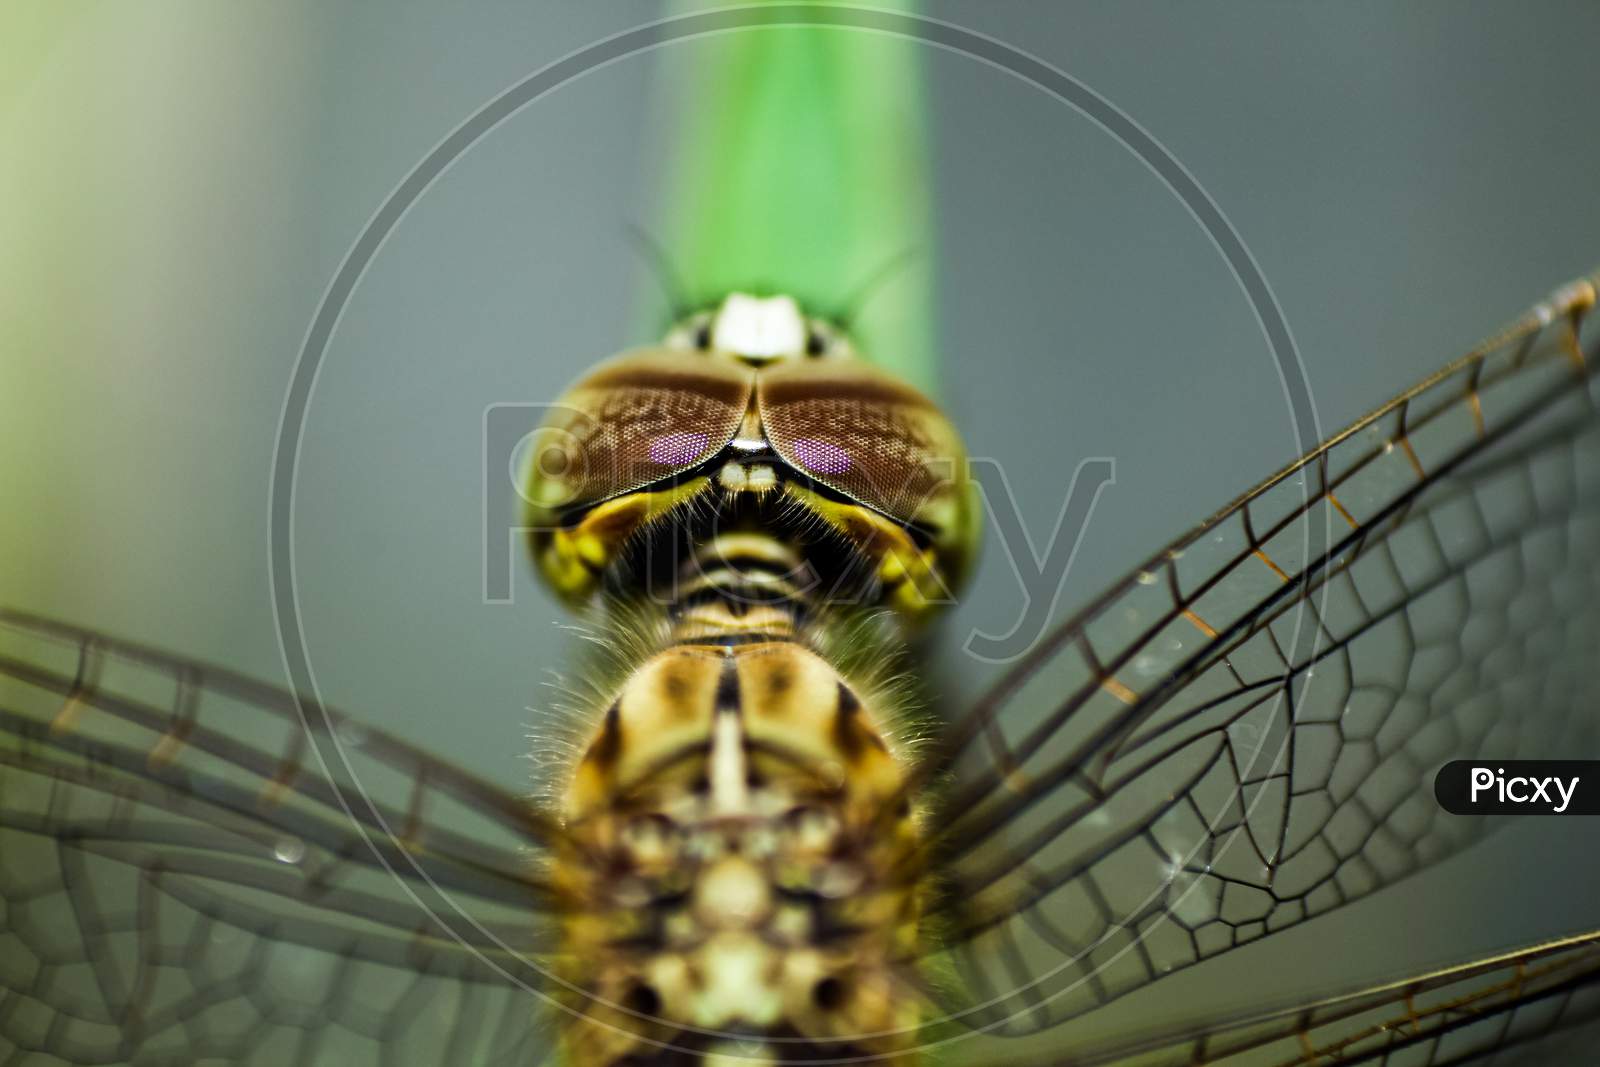 Head view of Dragonfly